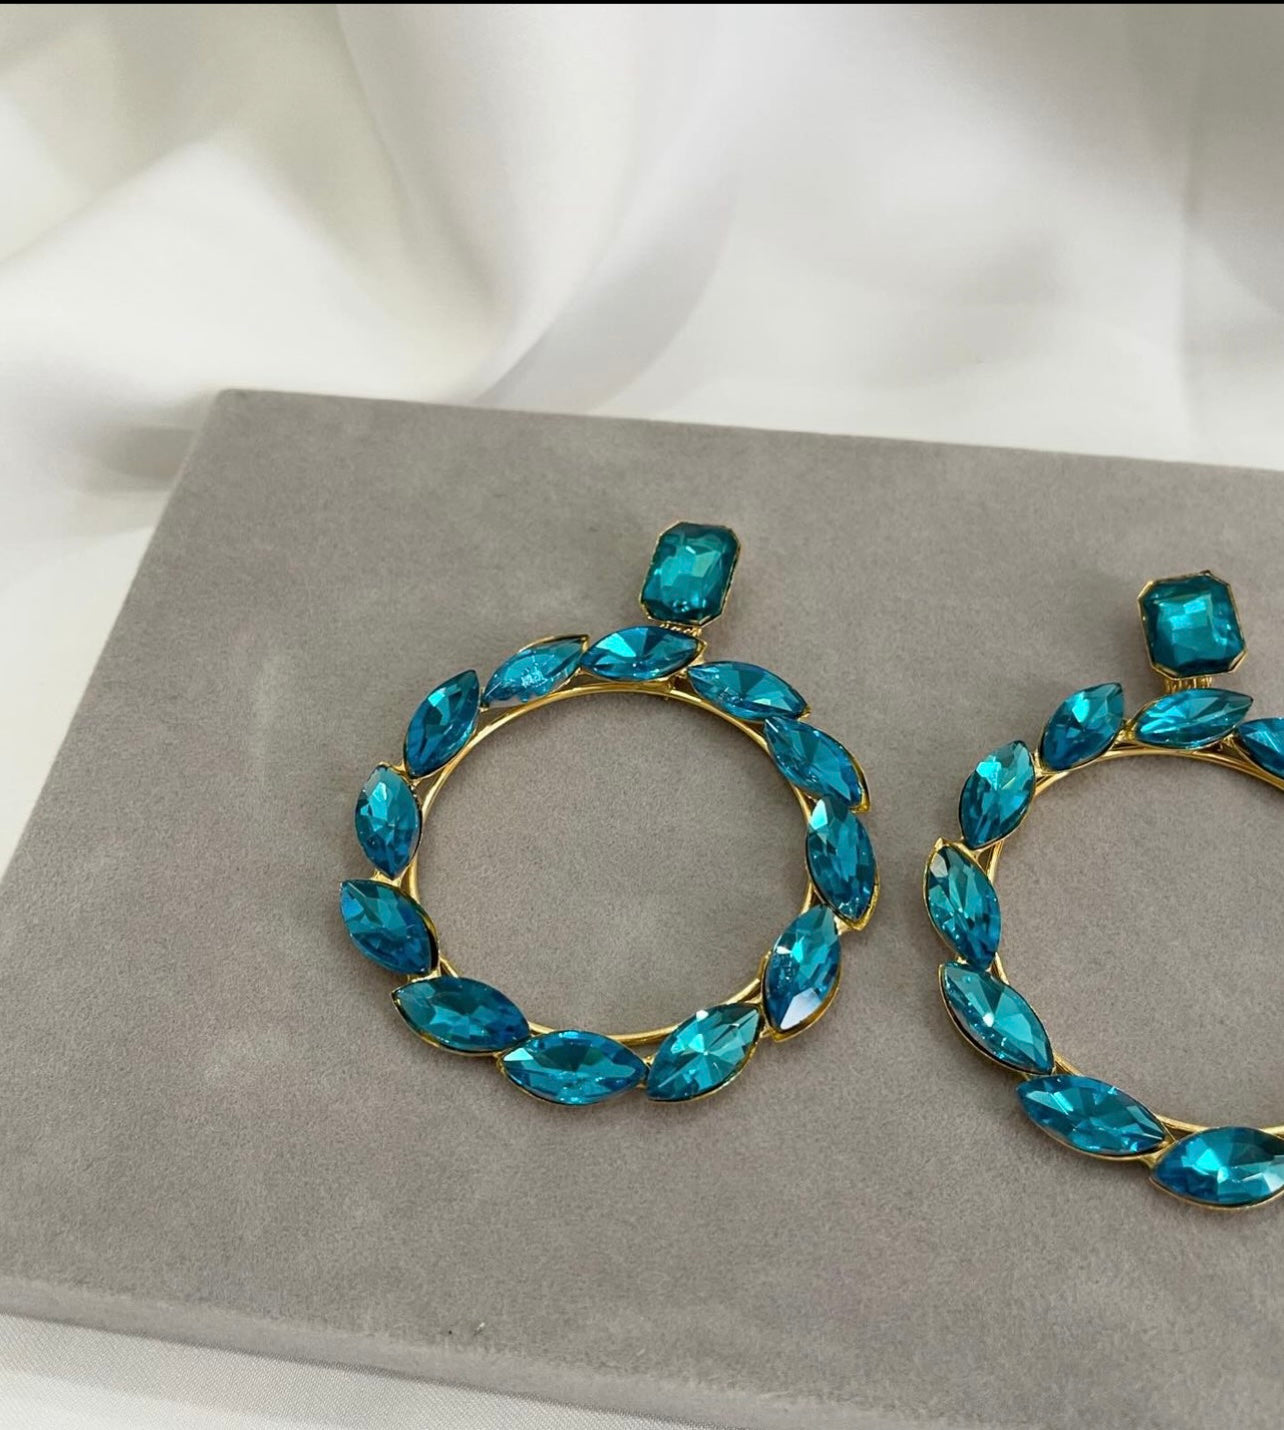 Exquisite Crystal Hoops - Shopeology